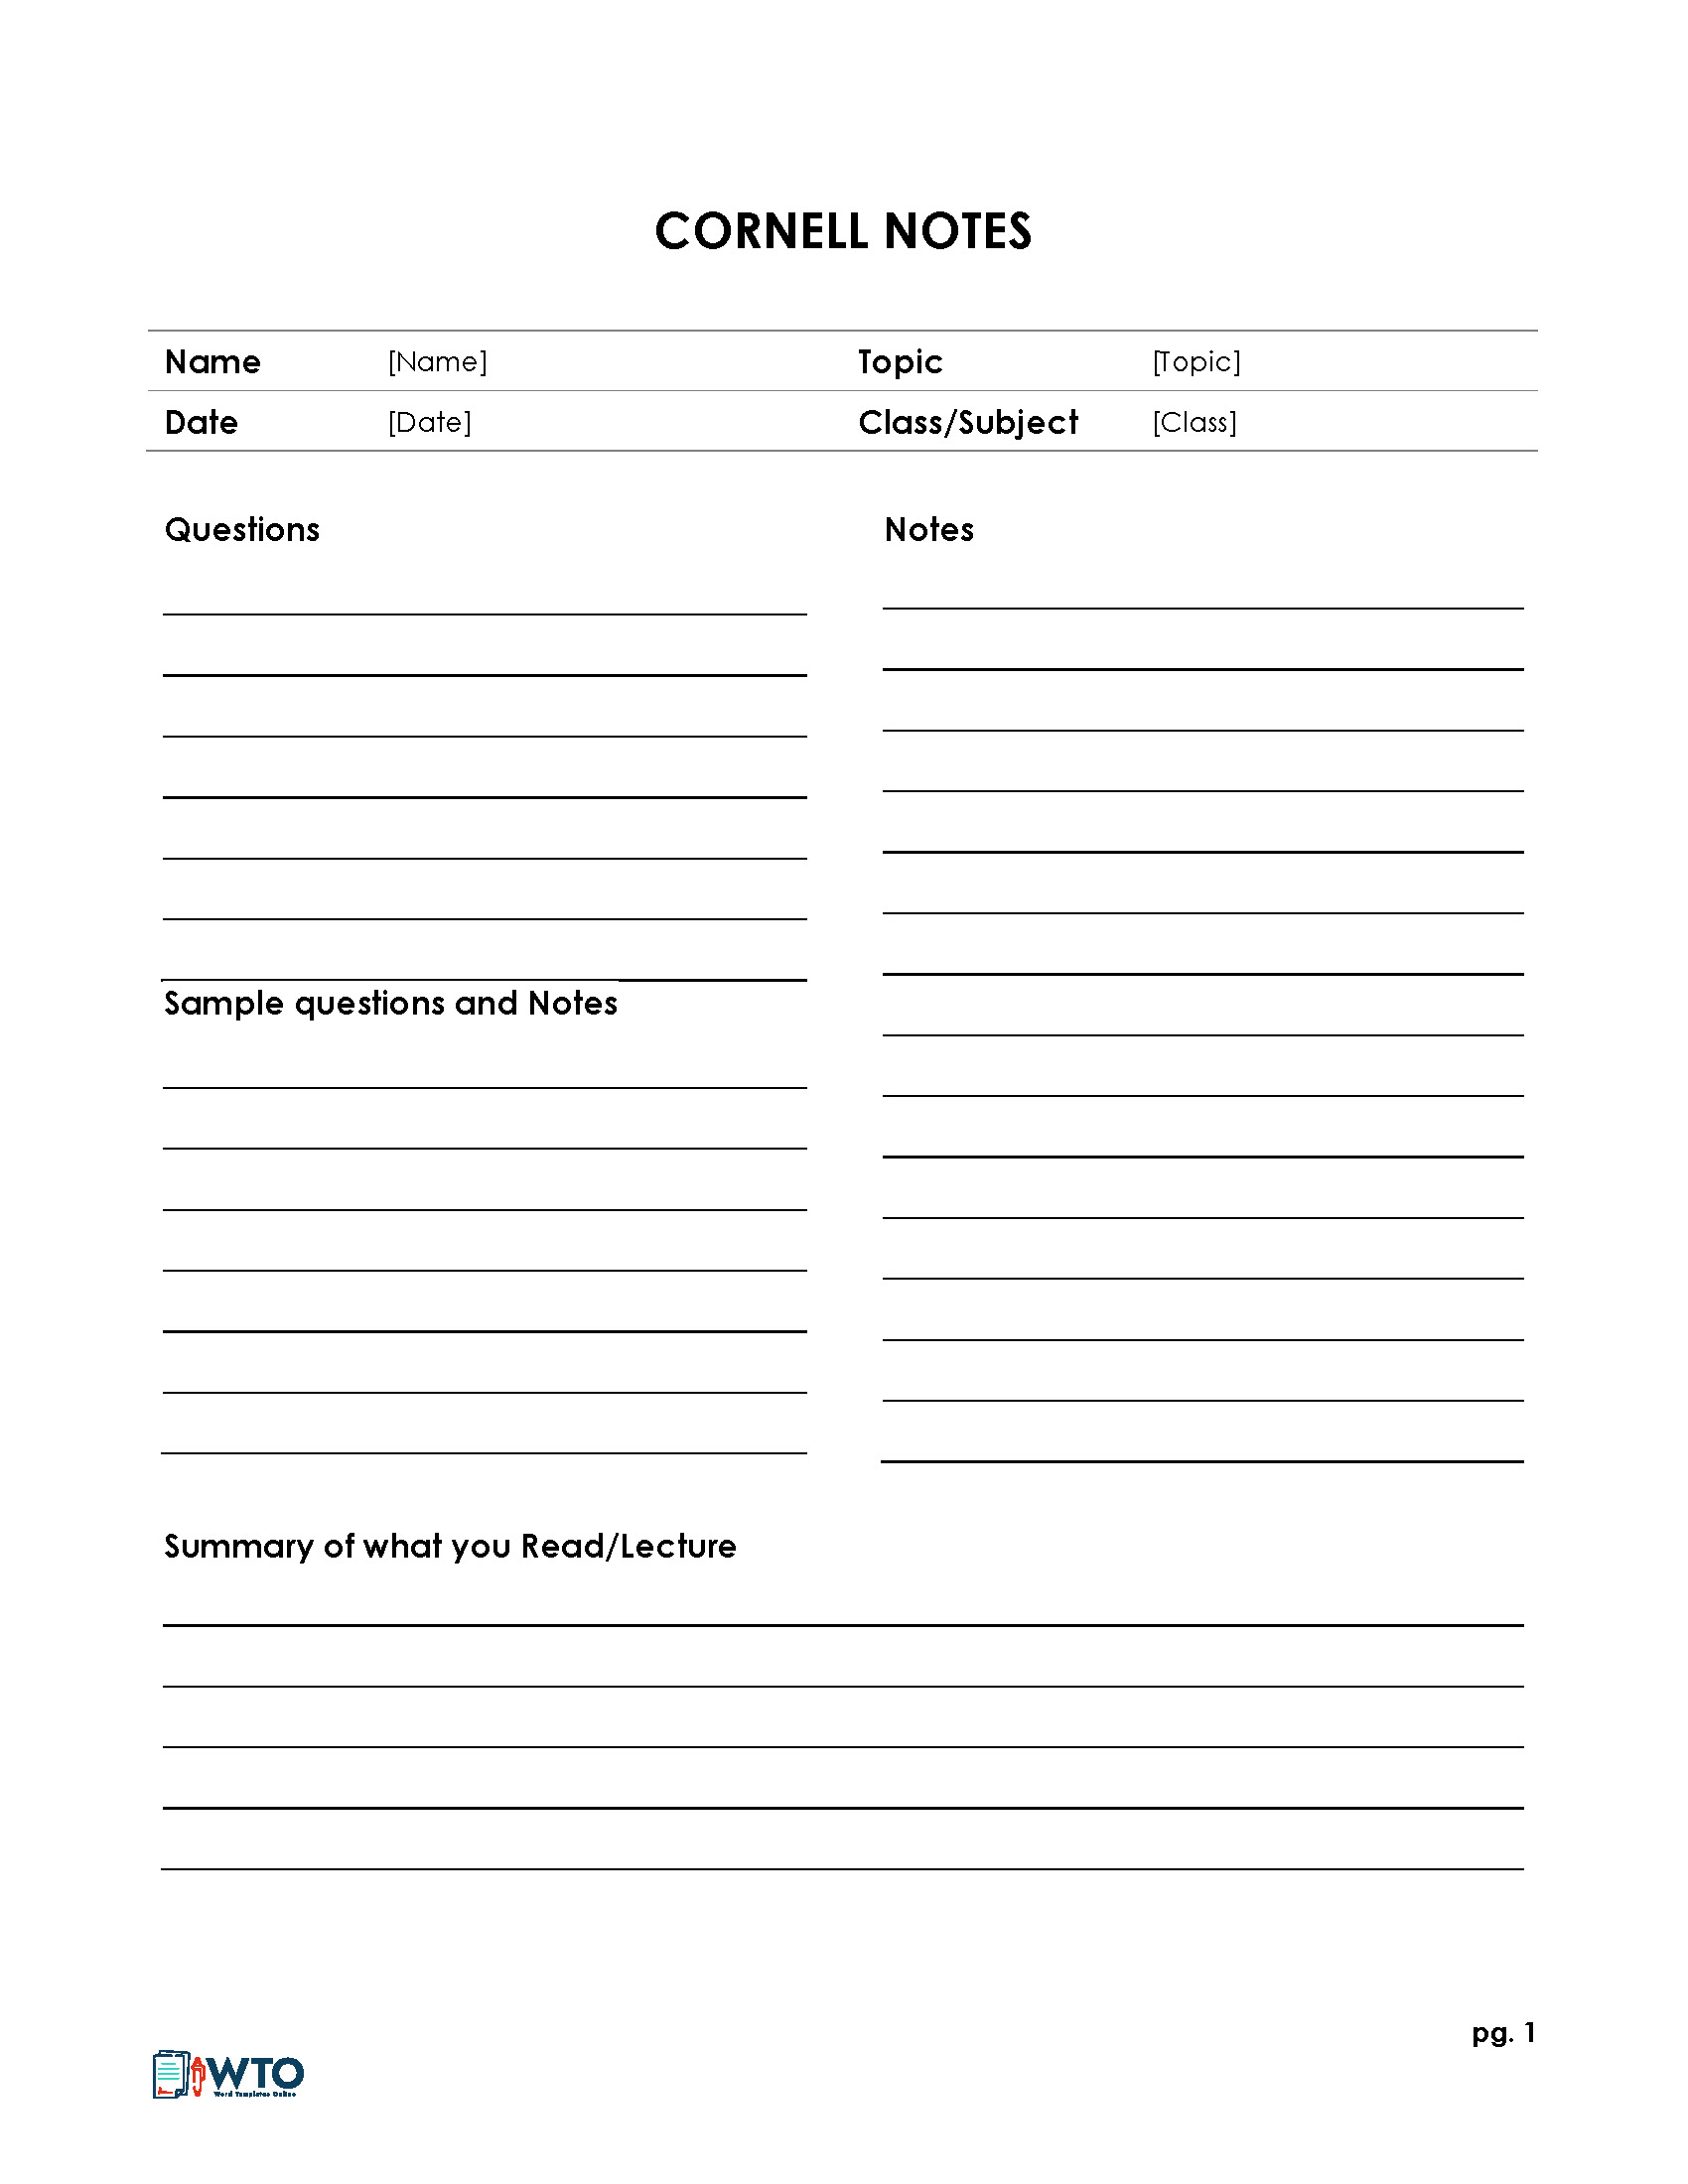 20 Free Cornell Note Templates (Cornell Note Taking Explained) Within Lecture Notes Template Word